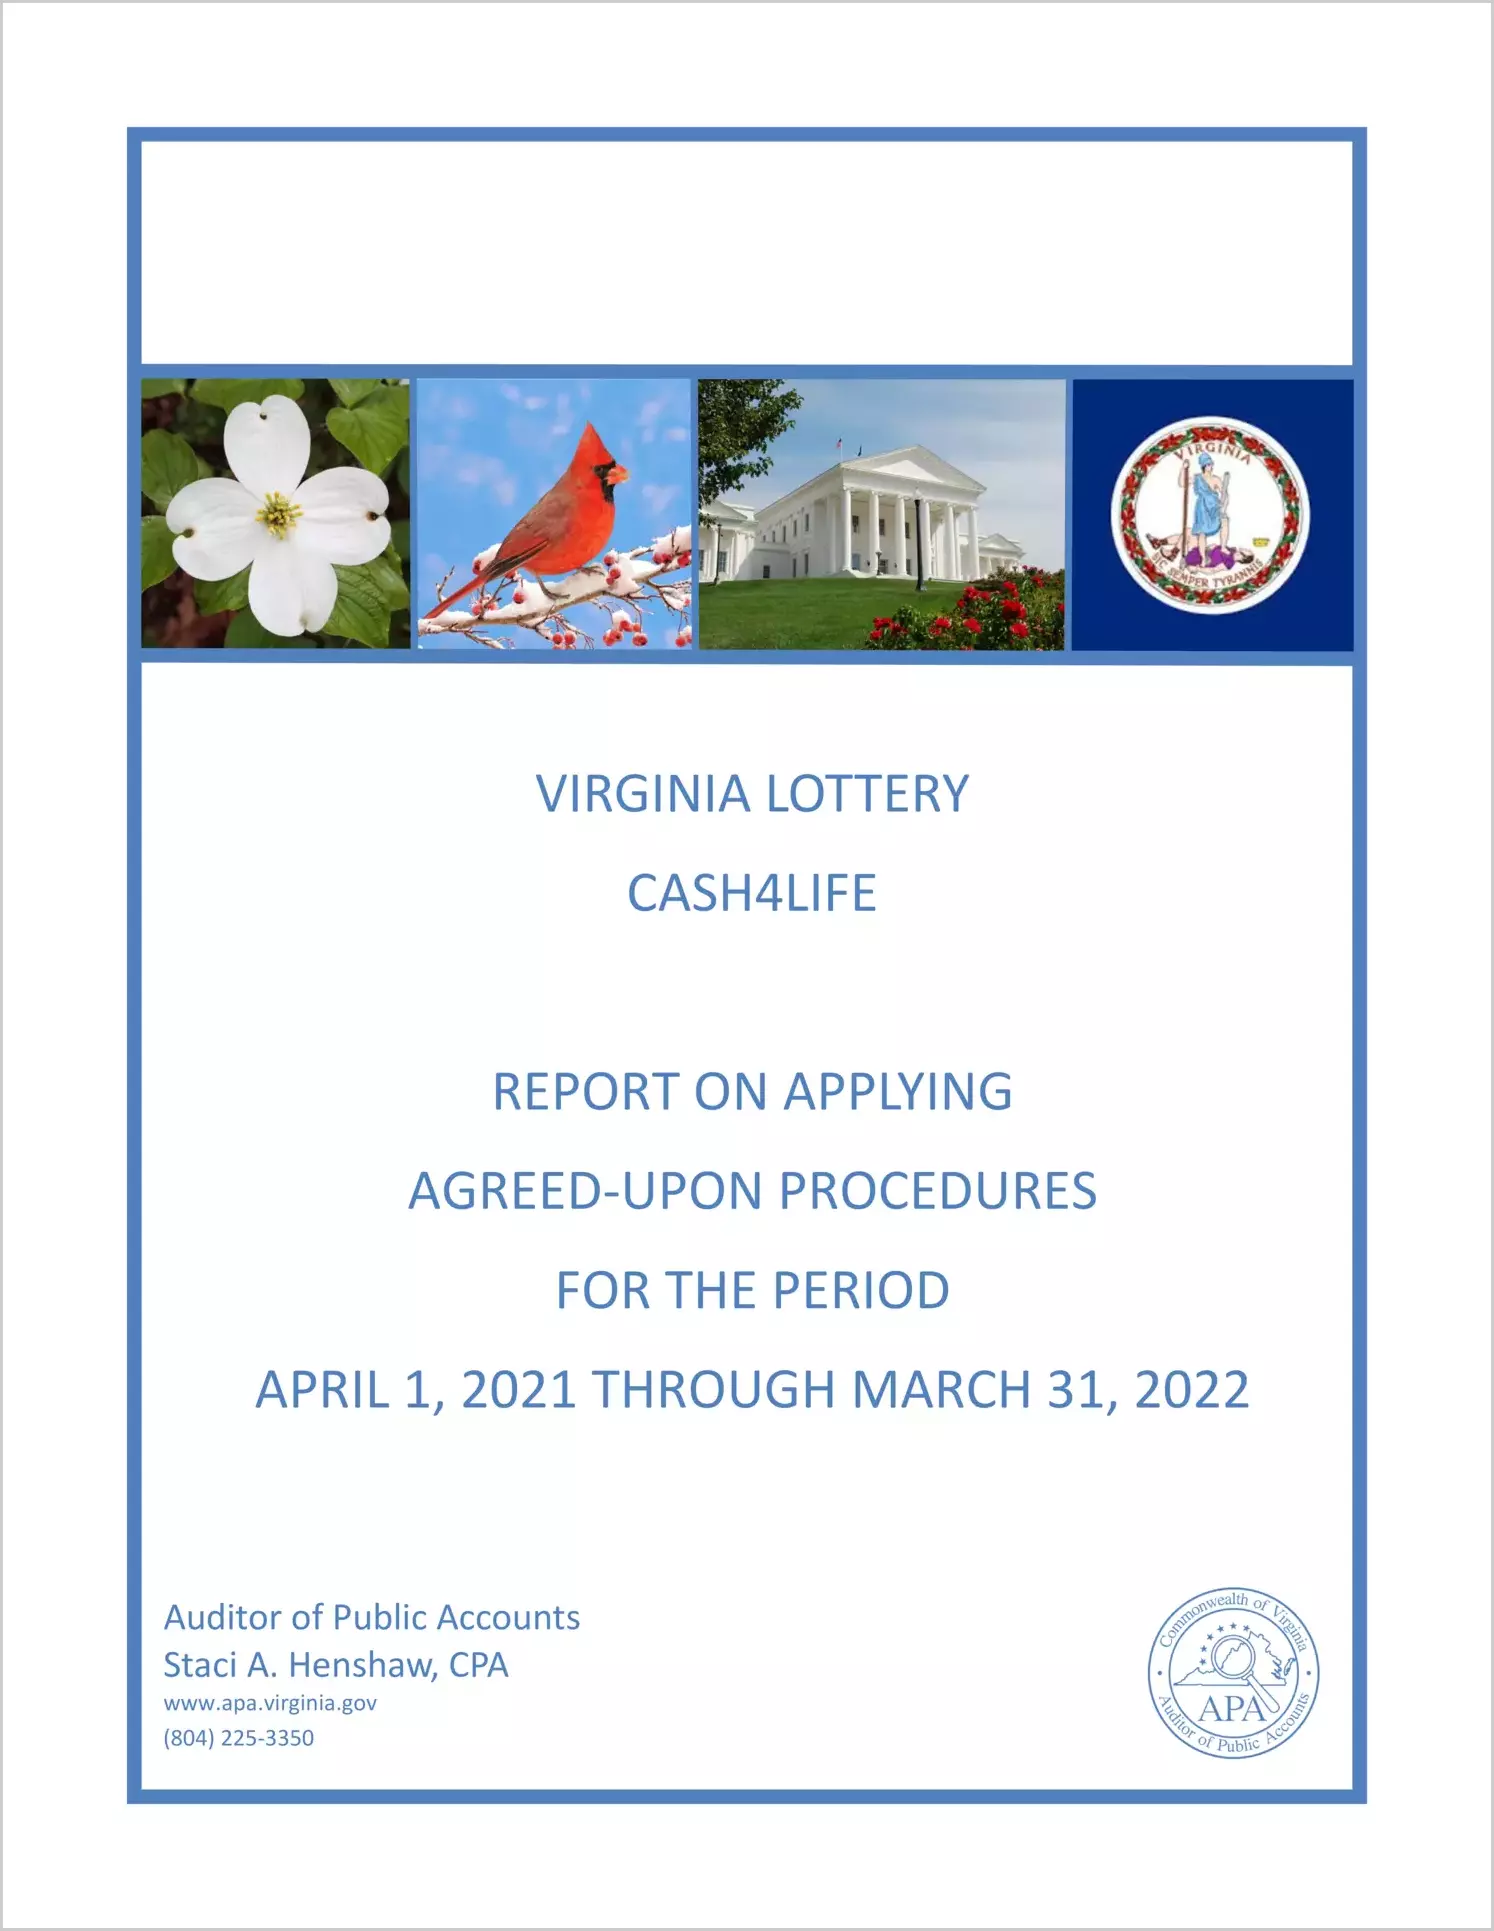 Virginia Lottery Cash4Life Report on Applying Agreed-Upon Procedures for the period April 1, 2021 through March 31, 2022